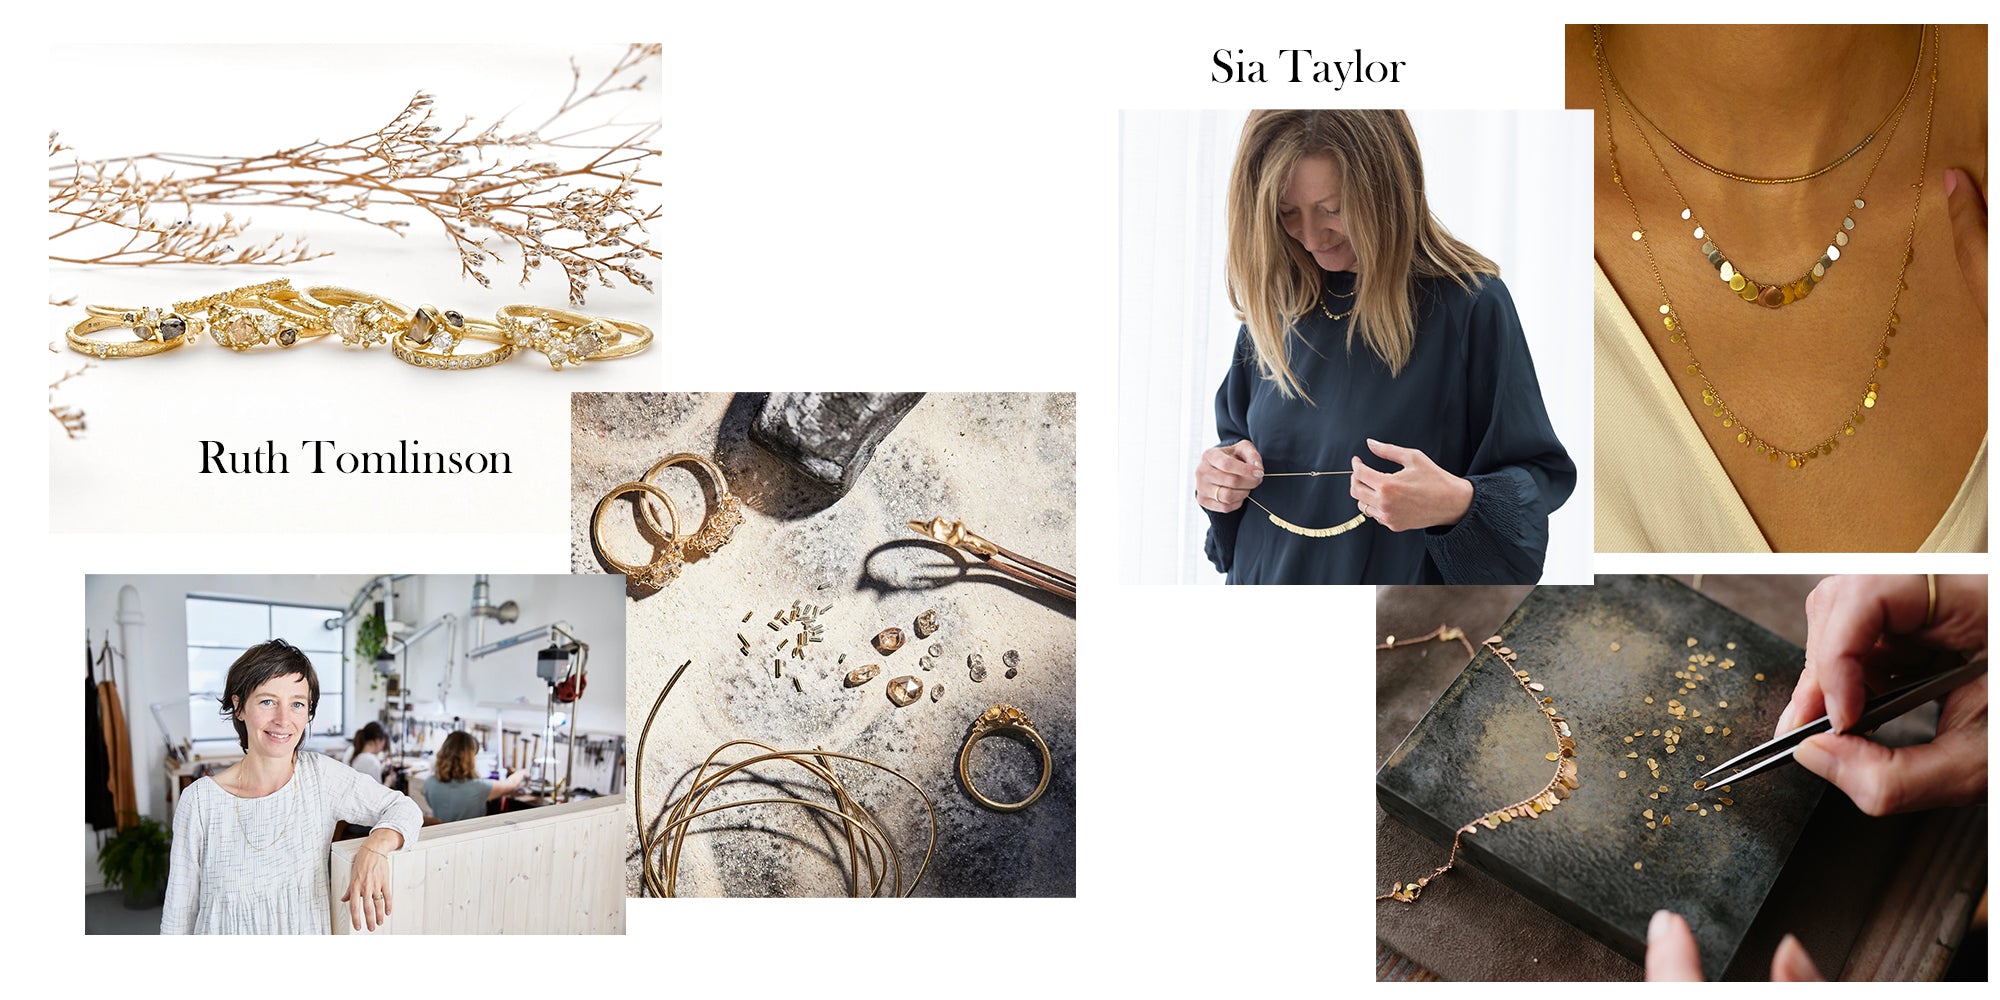 UK Takes NYC: Ruth Tomlinson & Sia Taylor Trunk Show